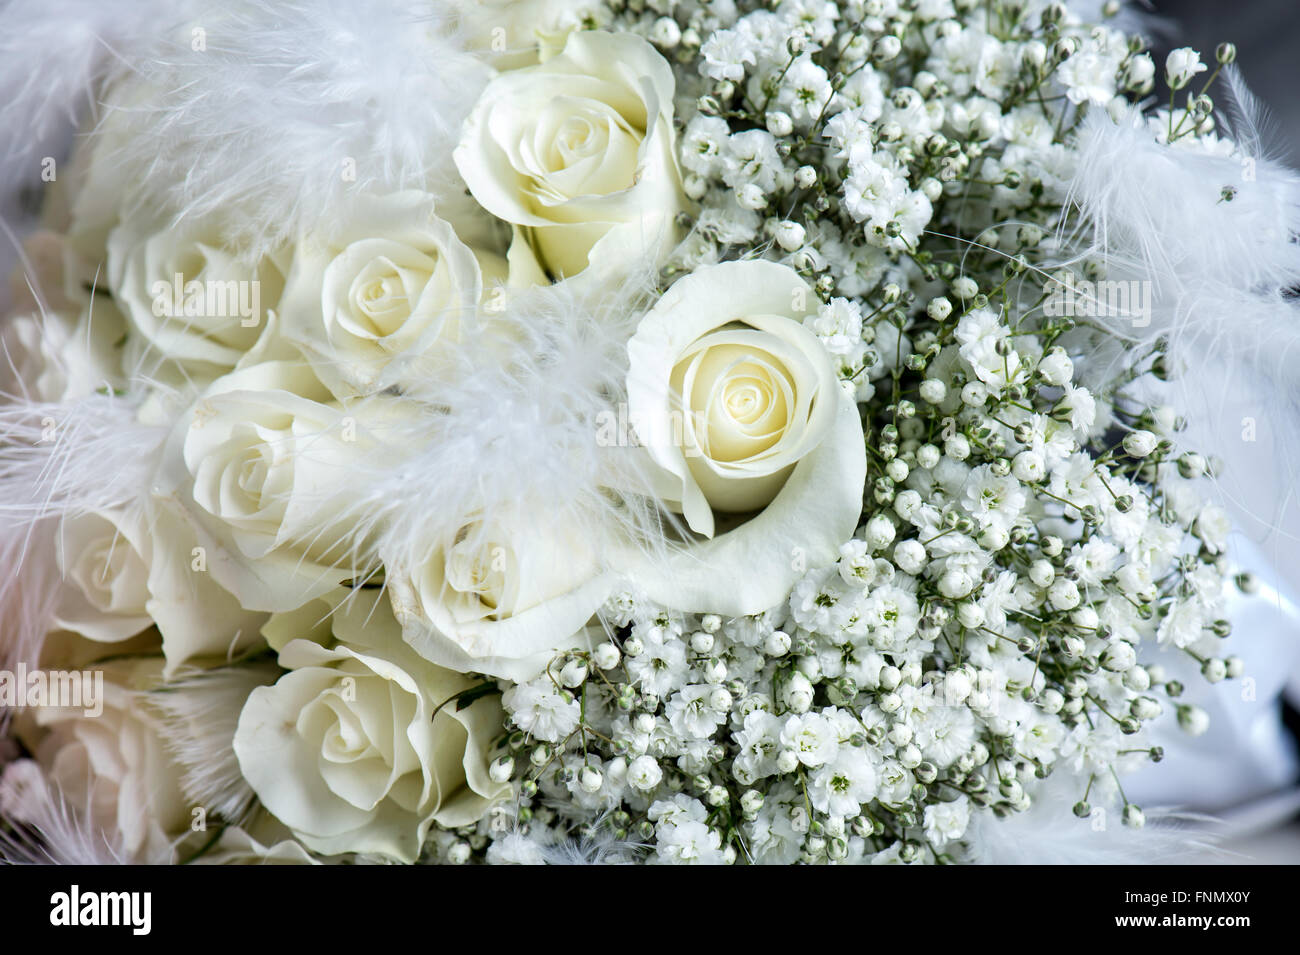 bouquet of white flowers wedding with white rose Stock Photo